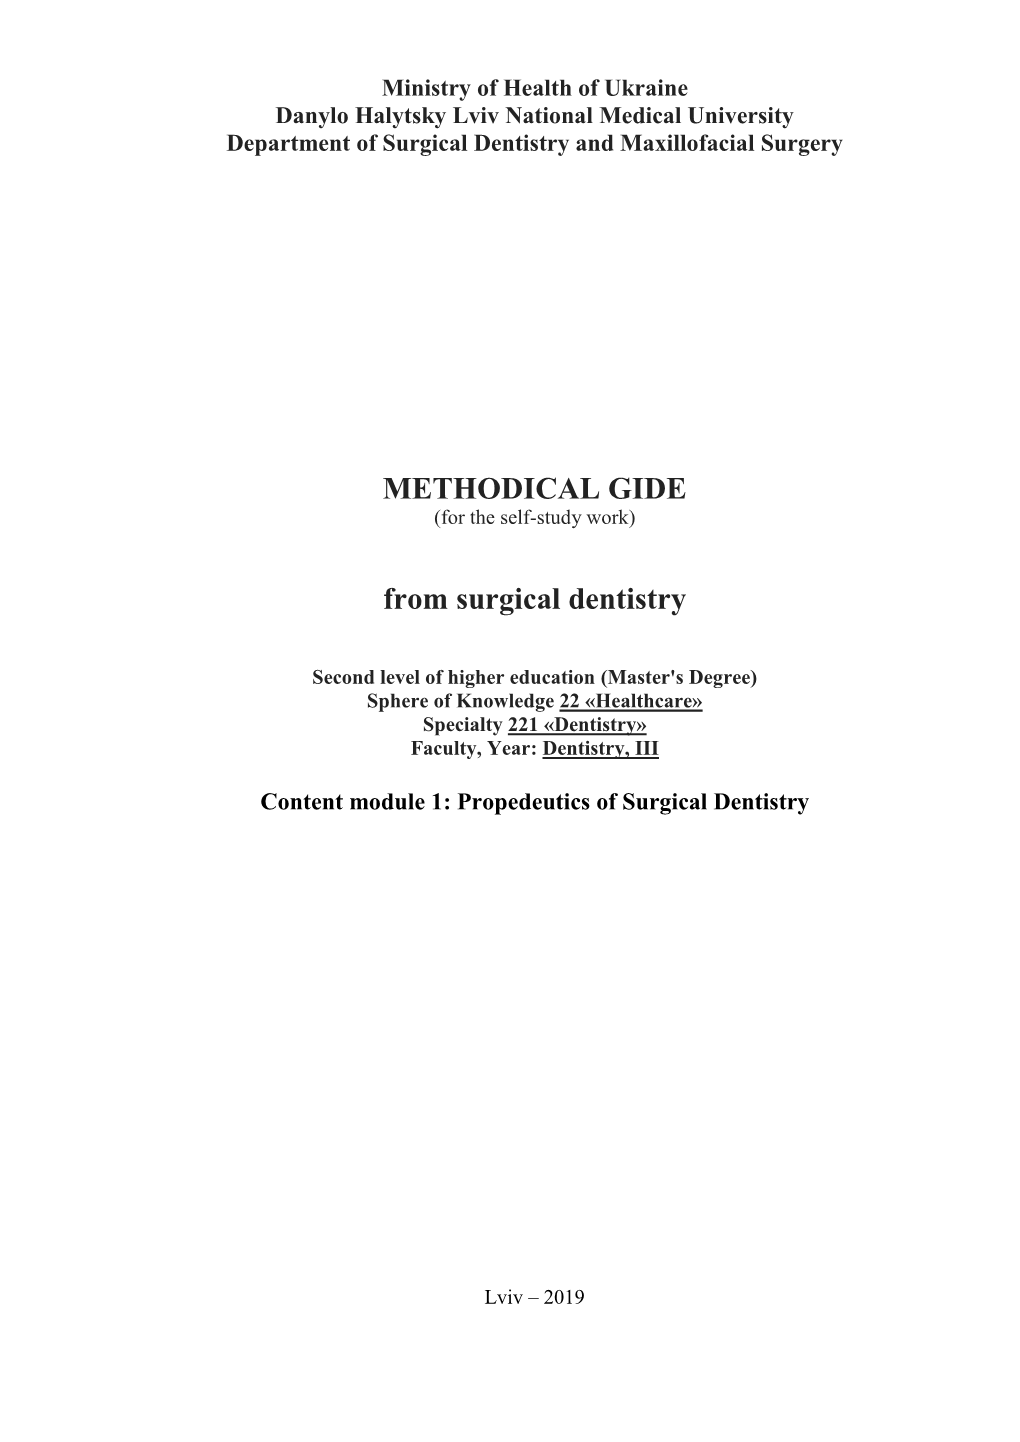 METHODICAL GIDE from Surgical Dentistry